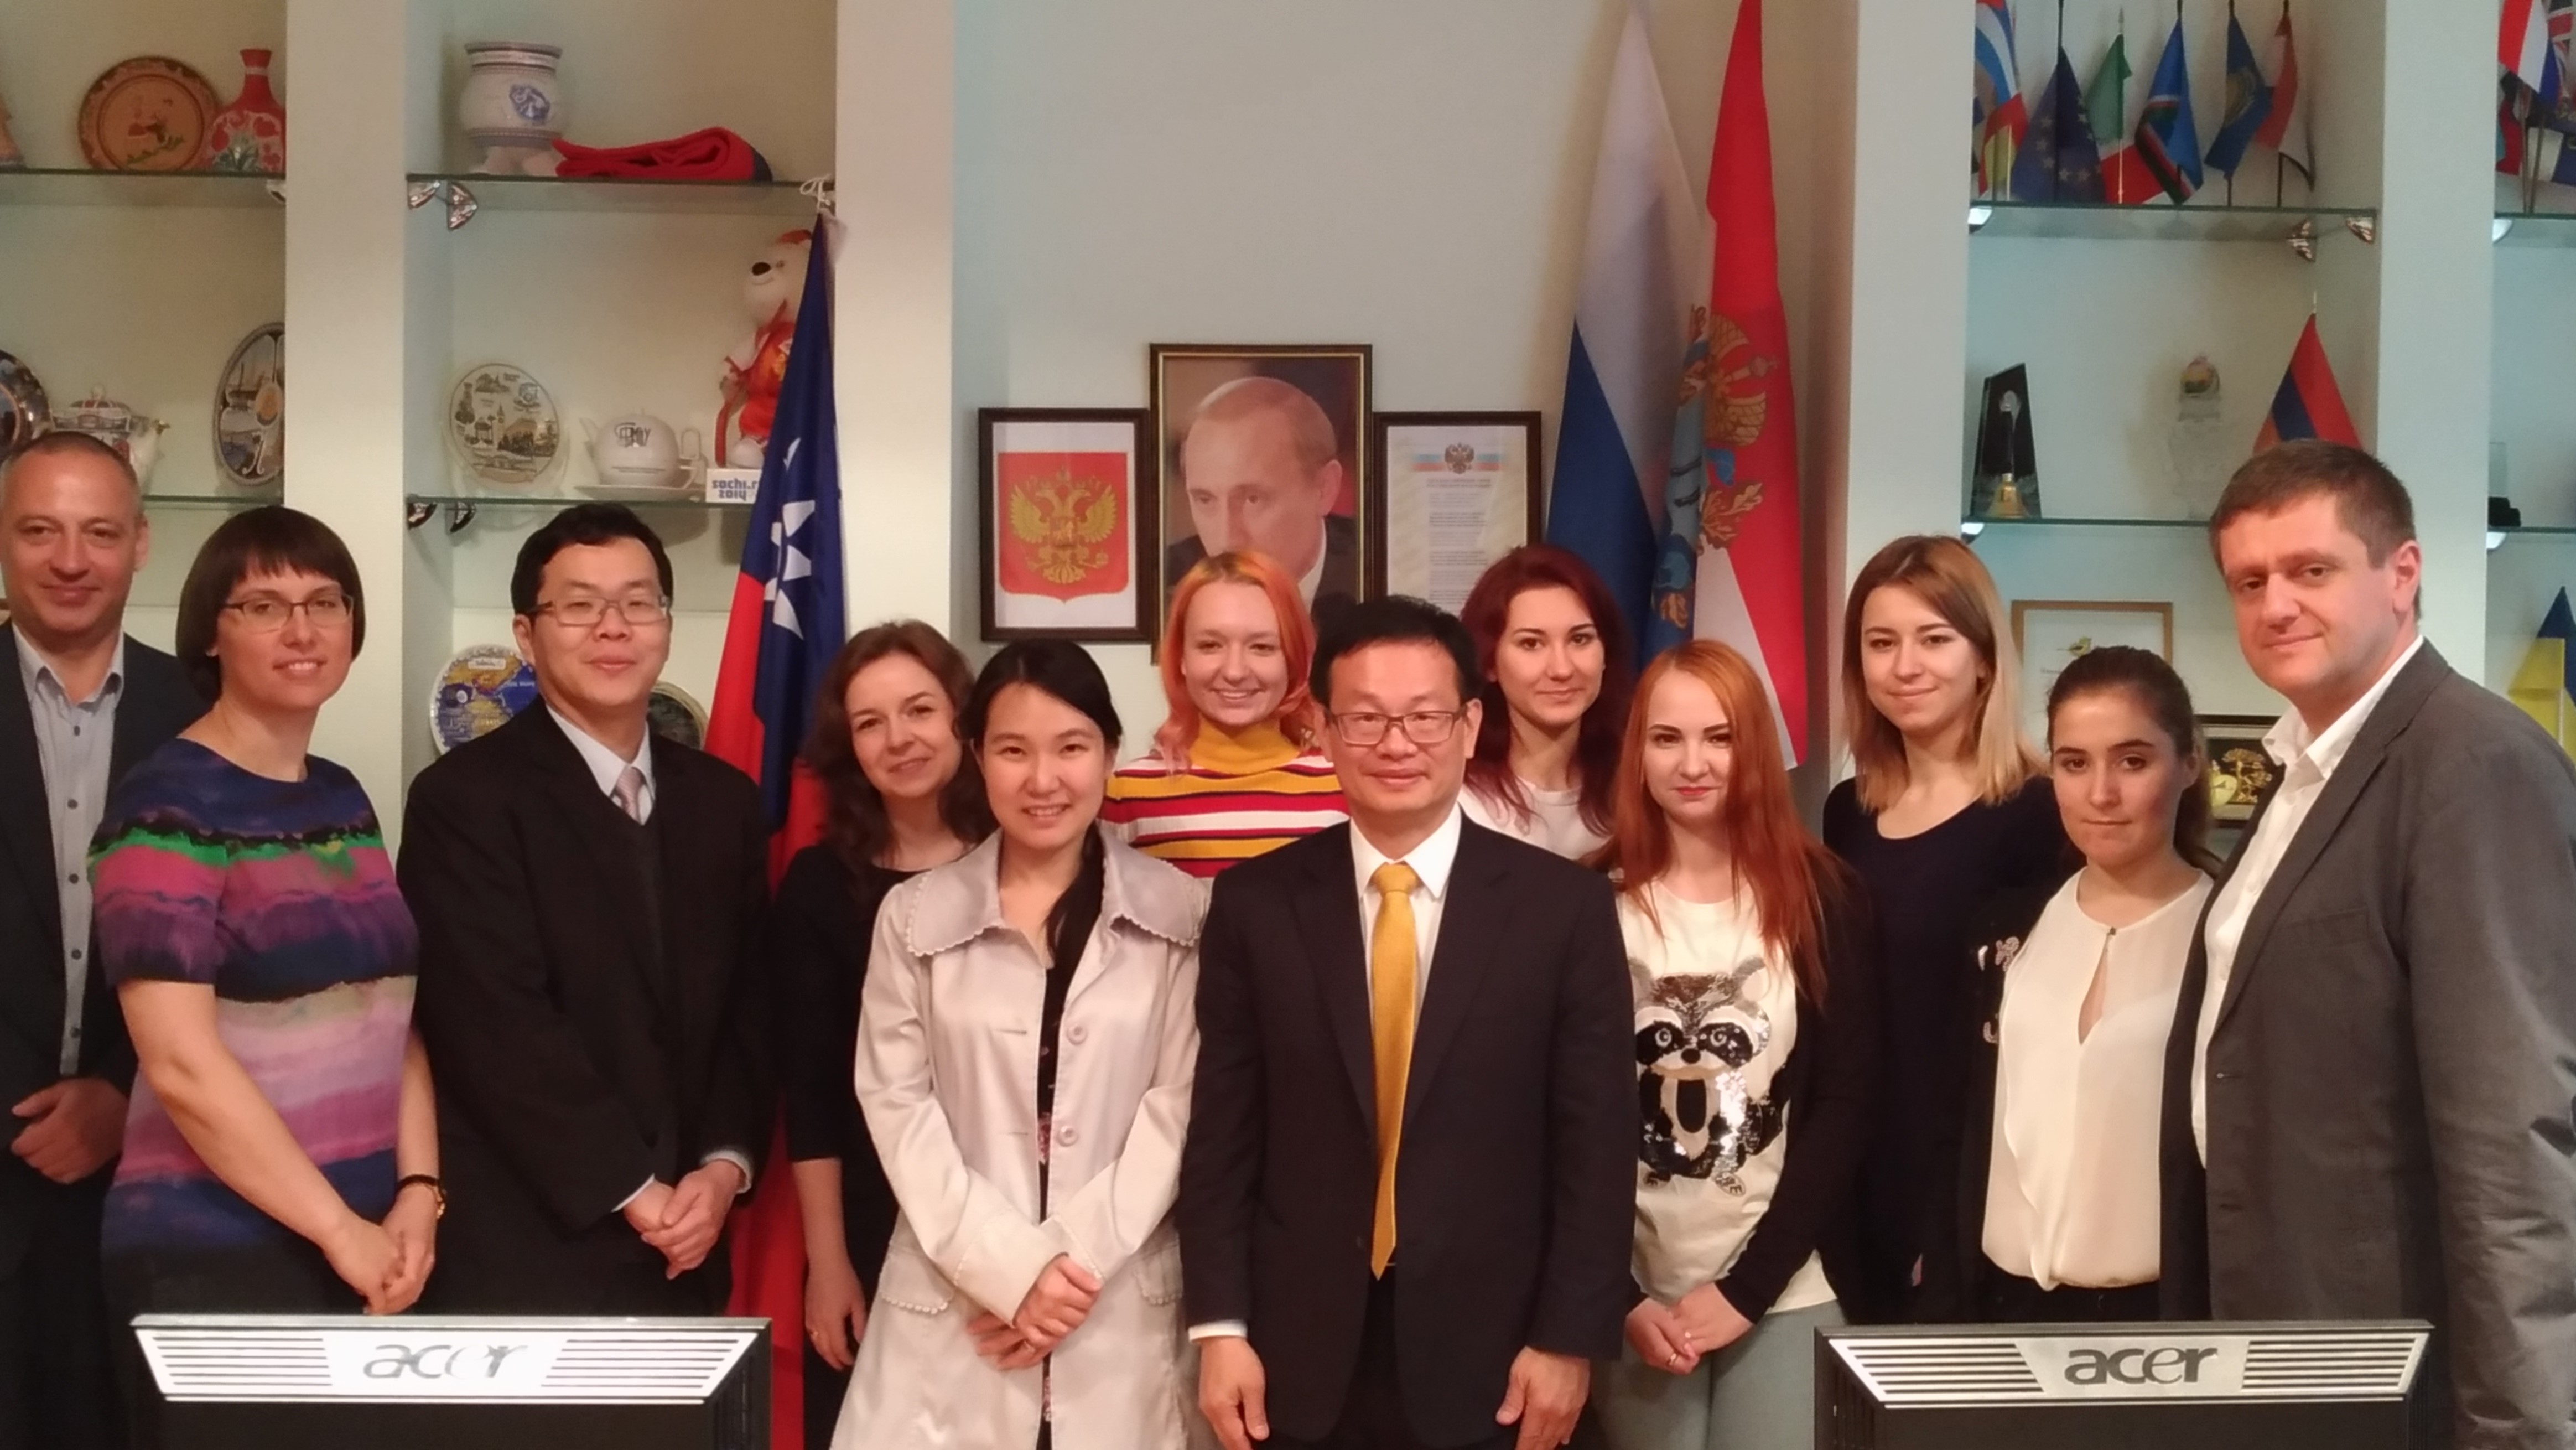 Representative Office in Moscow for the Taipei-Moscow Economic and Cultural Coordination Commission (TMECCC) Visits Universities in Samara to Seek Further Academic Cooperation